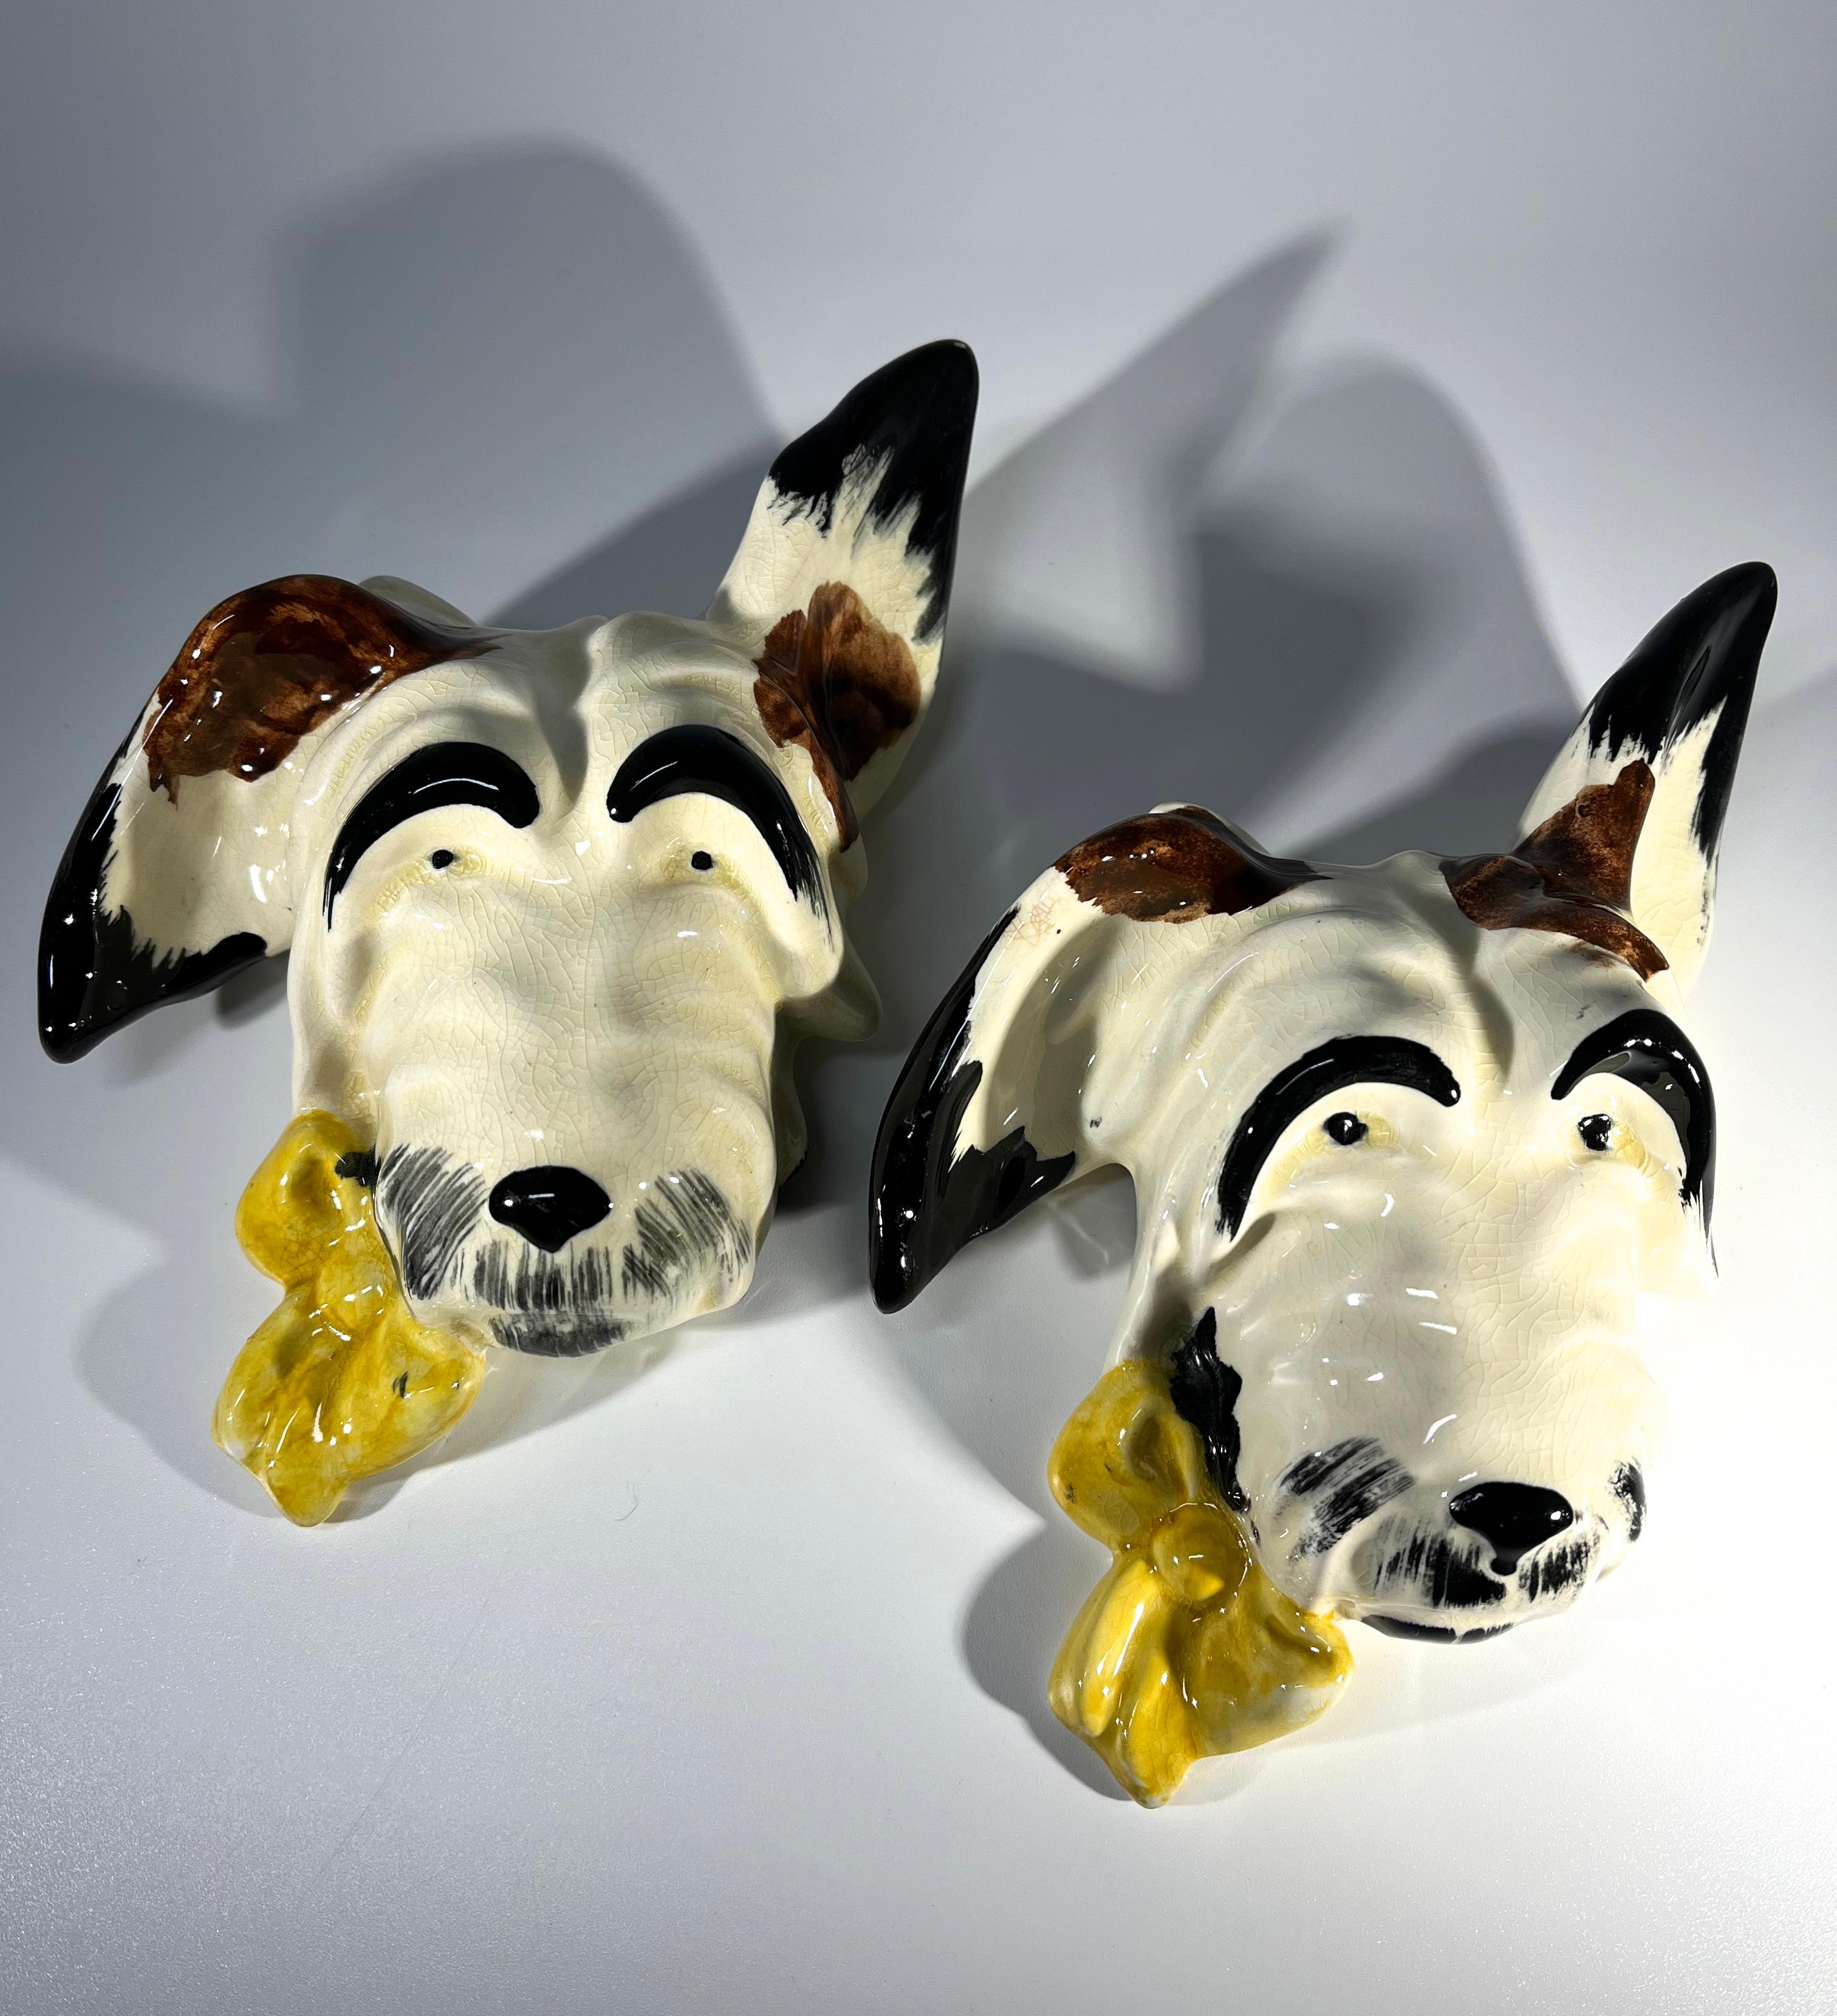 An engaging pair of hand painted English ceramic terriers wall decor
Joyful characters 
Circa 1960's
Height 6.5 inch, Width 5 inch, Depth 2 inch
In good condition. Light crazing adds to their charm
Wear consistent with age and use